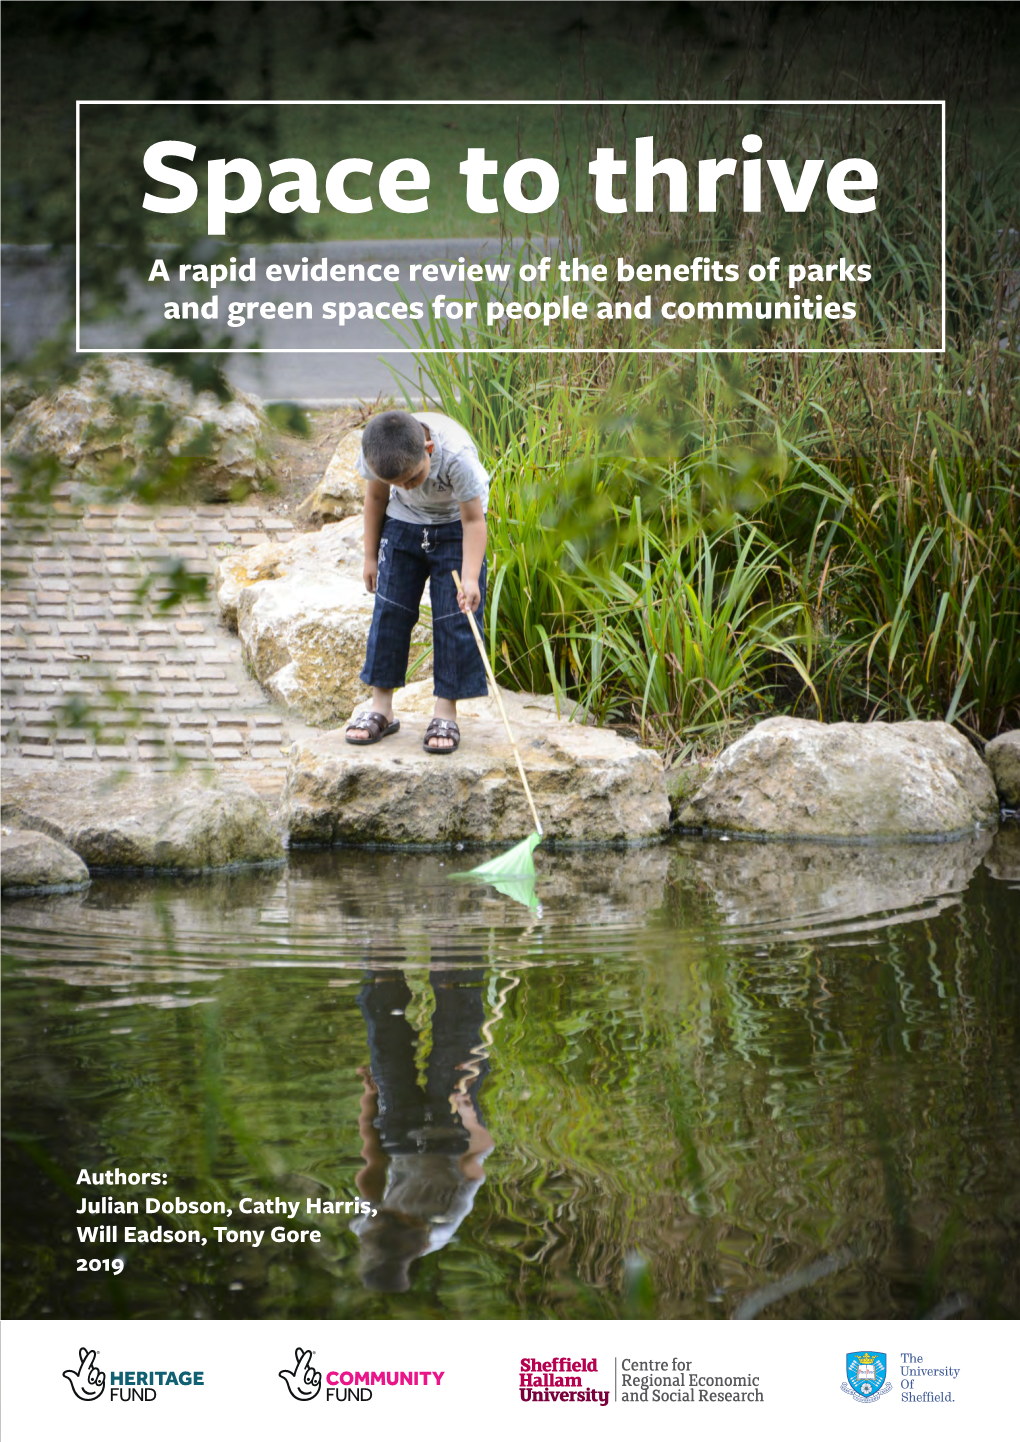 Space to Thrive 2019, a Rapid Evidence Review of the Benefits of Parks and Green Spaces for People and Communities